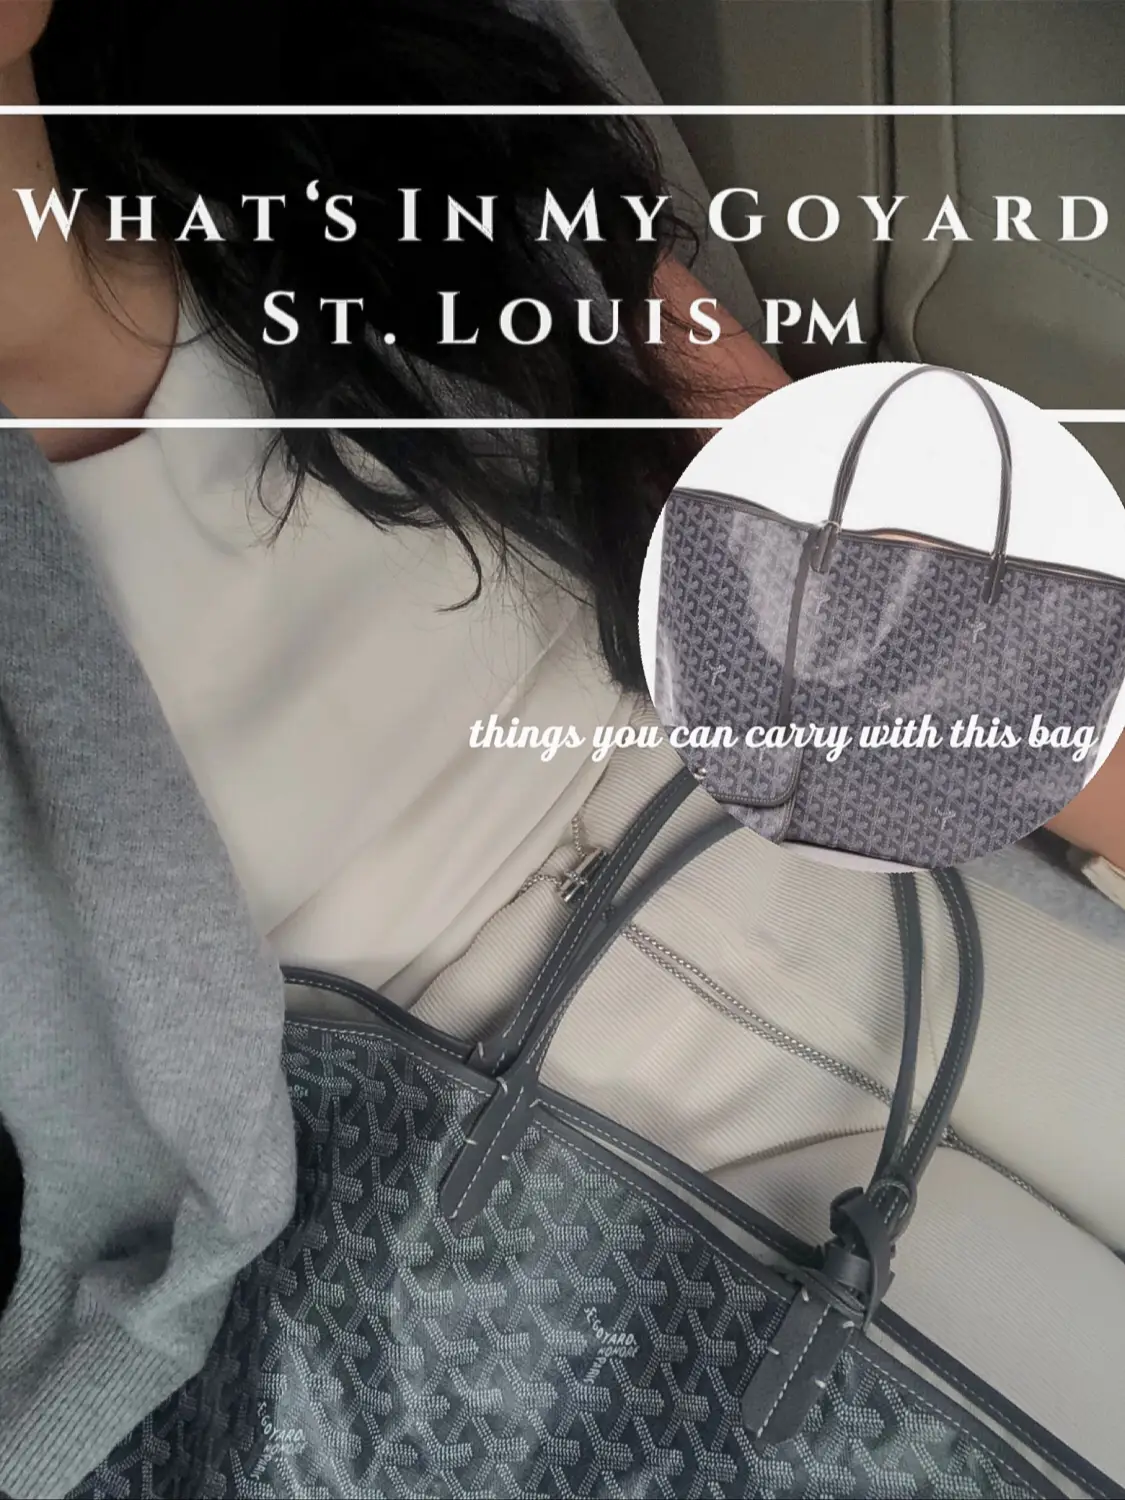 What's in my Goyard St. Louis PM * Chatty bring some SNACKS